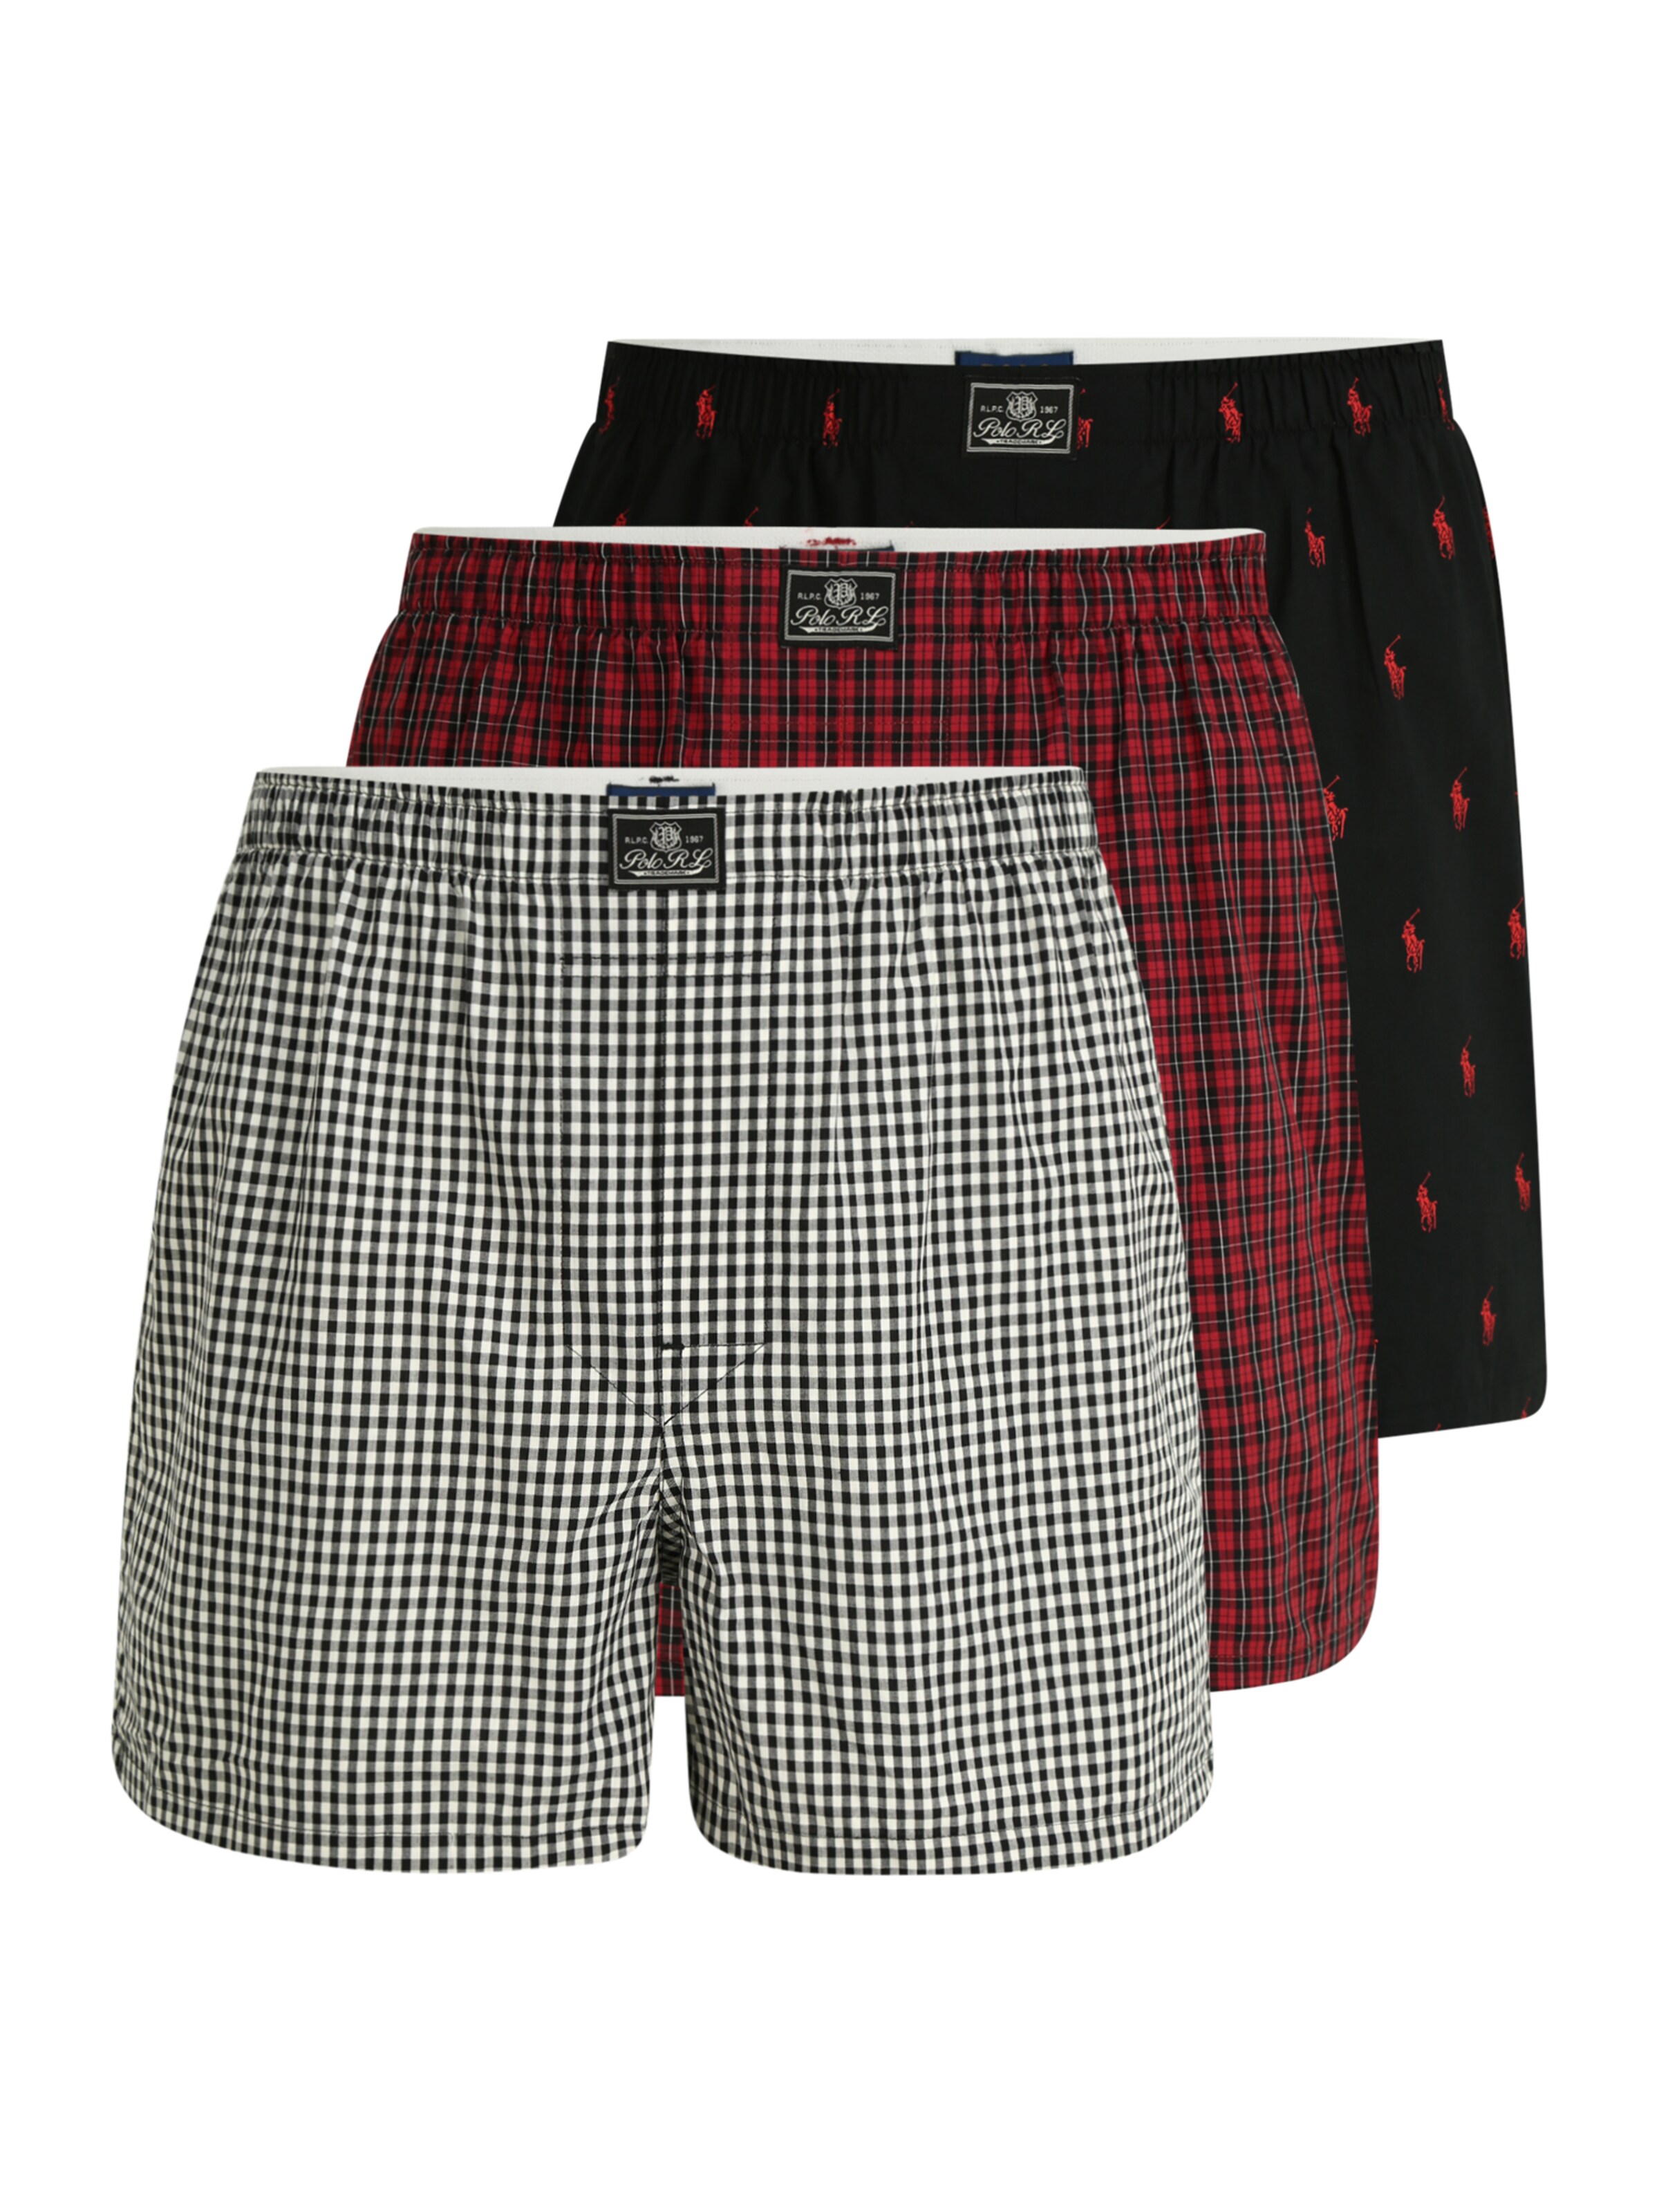 black and red polo shorts